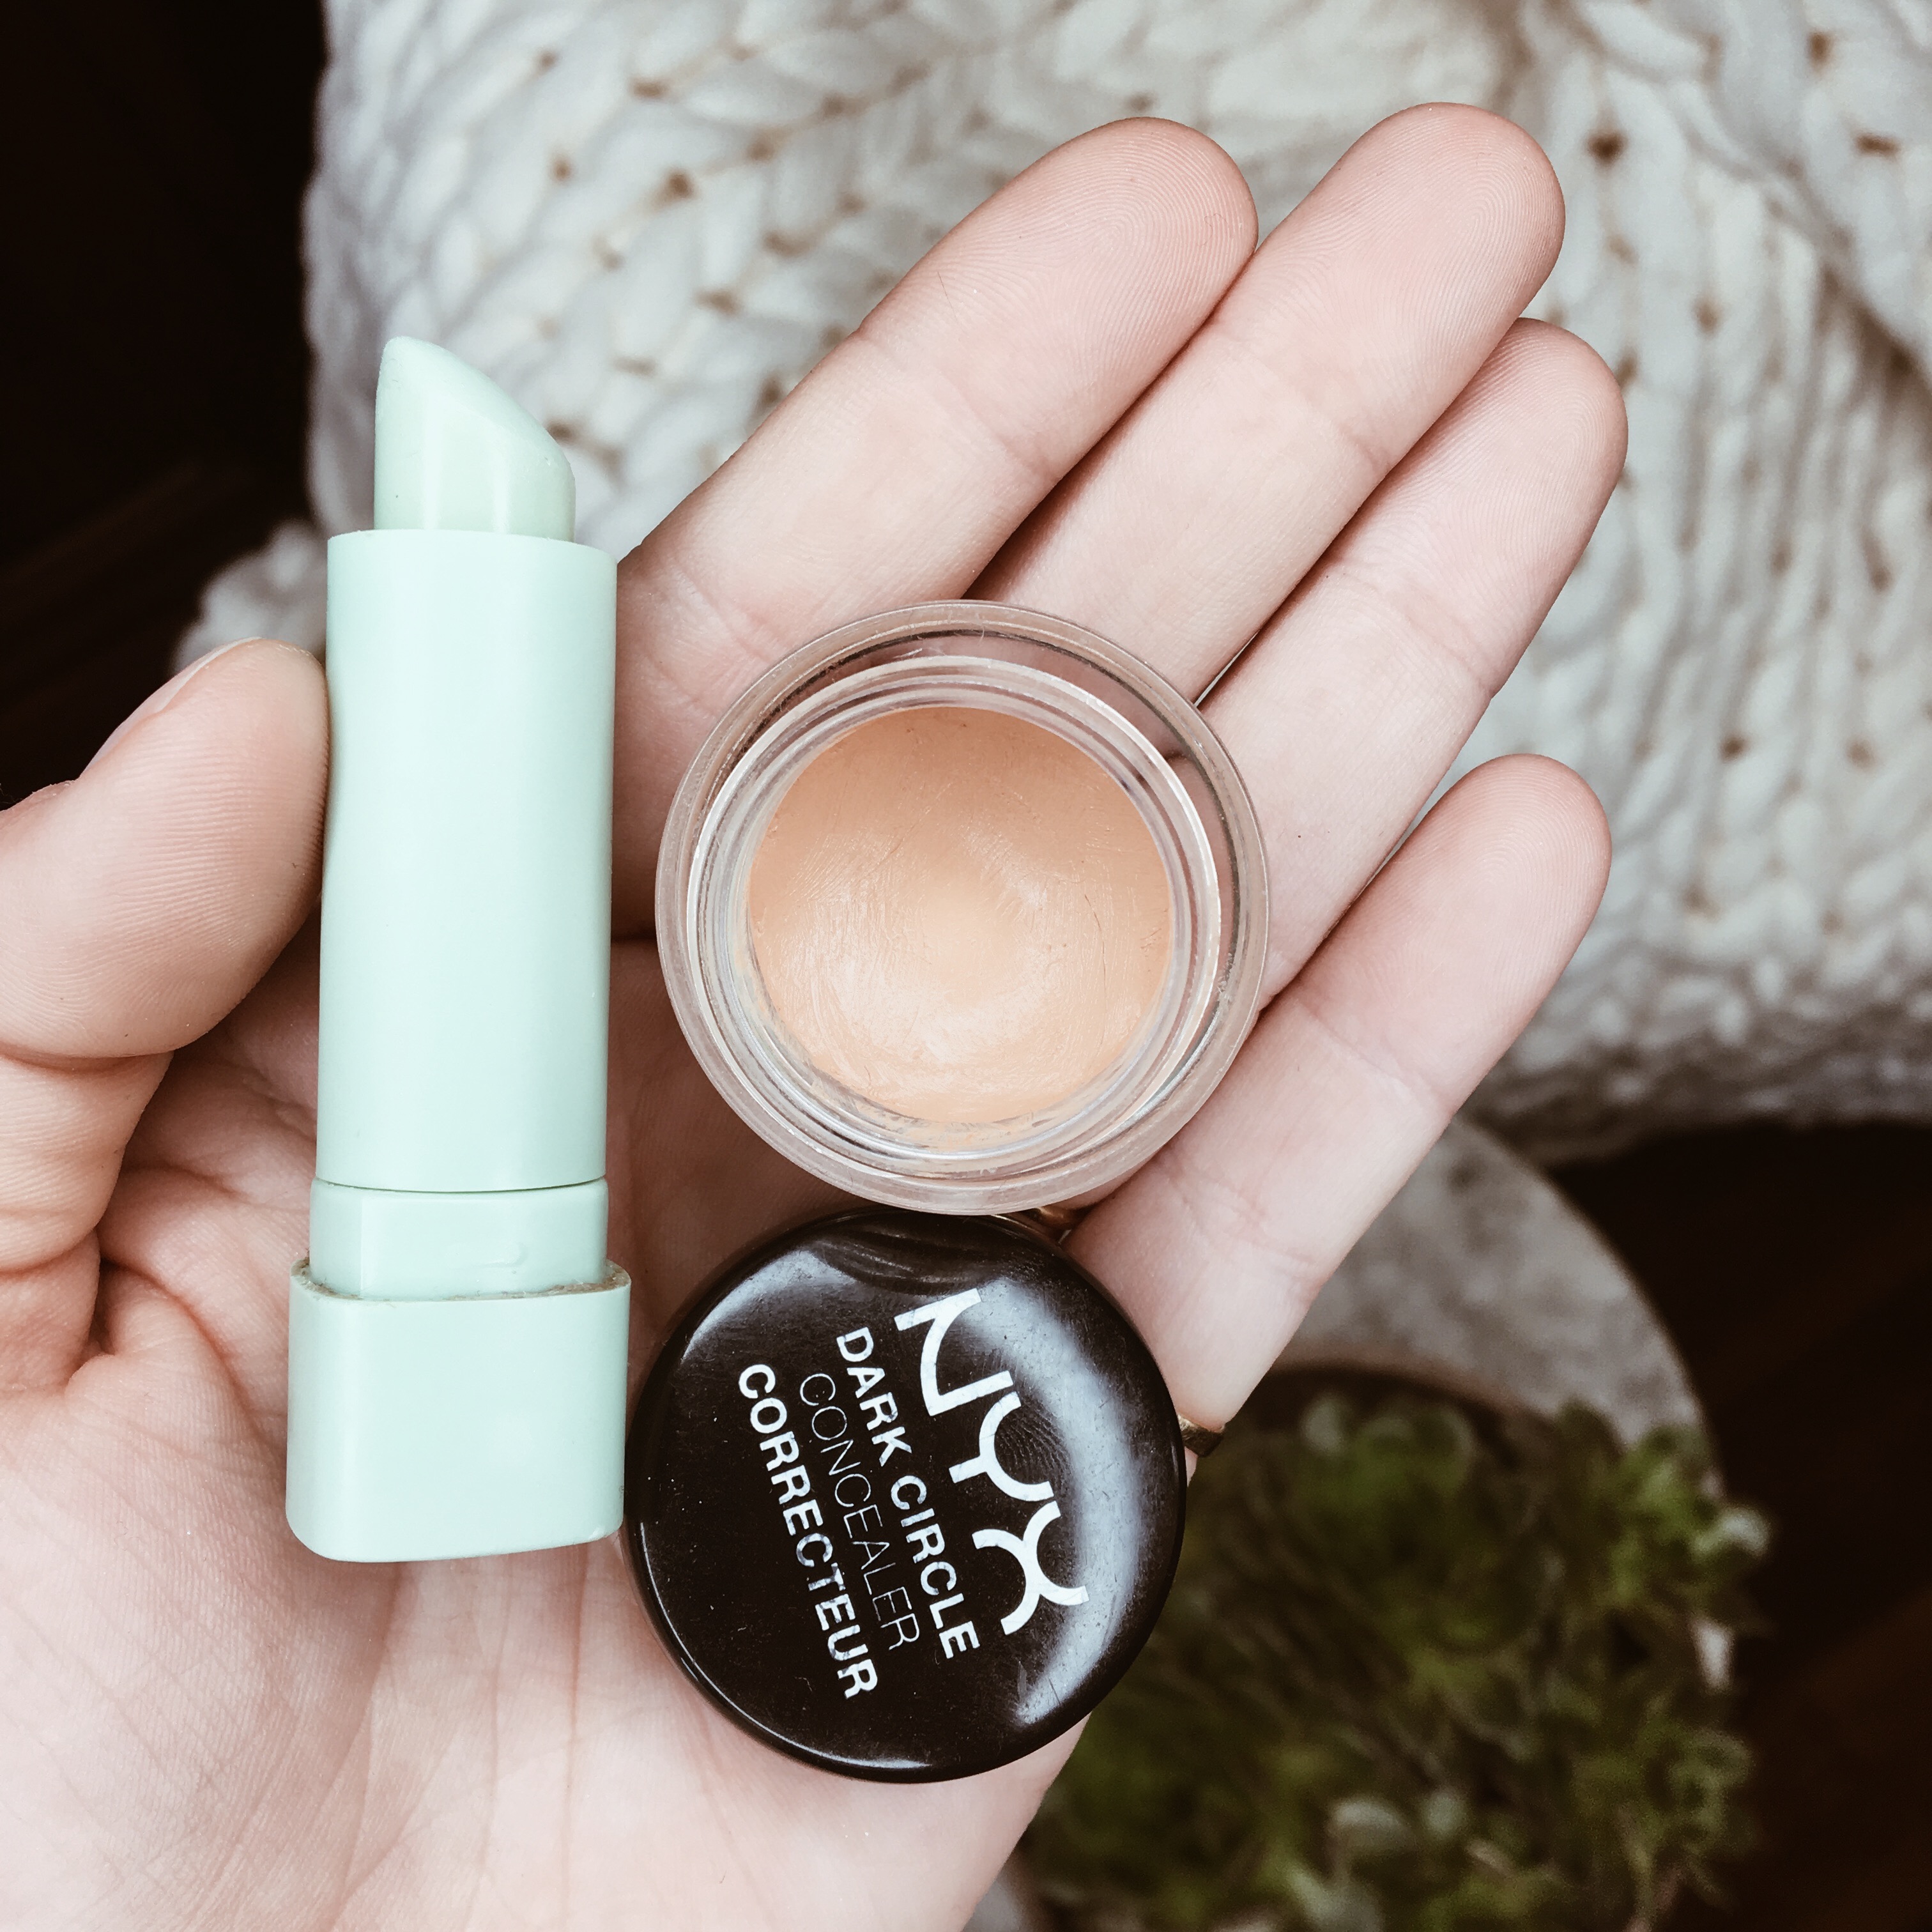 nyx concealer-maybelline-makeup-enhance your beauty-lifestyle-blogger 